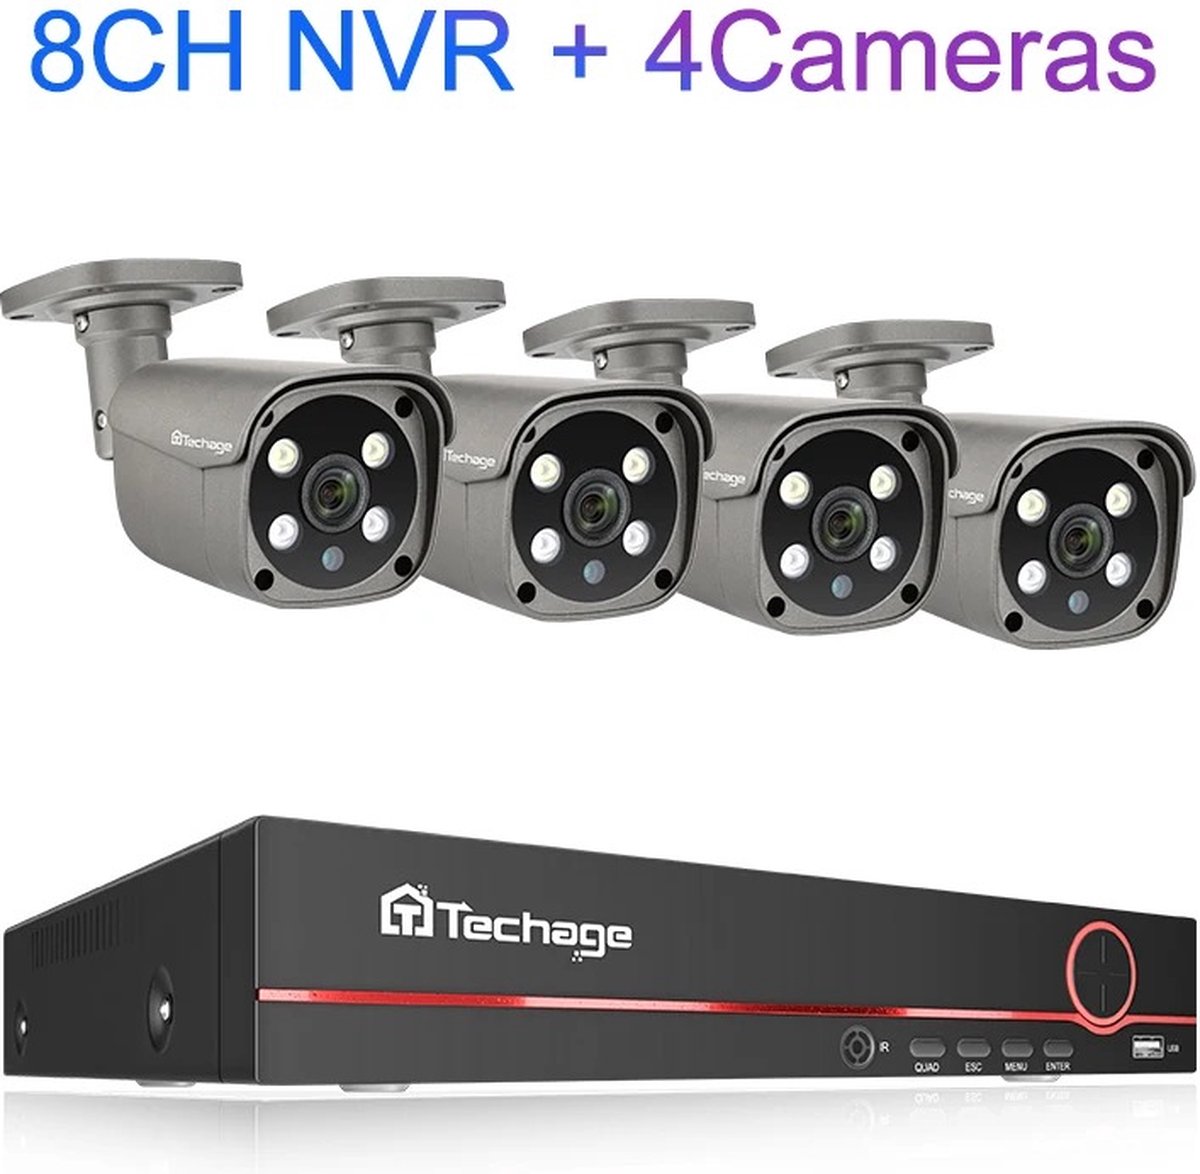 Oopers Techage H.265 8CH 5MP 4K 1T Poe Camera System - CCTV - Outdoor Buiten - Home Security Camera Systeem - Wifi Camera Set - Video + Audio-opname - Beveiligingscamera - 4 Camera’s - Nachtzicht - Motion Detector